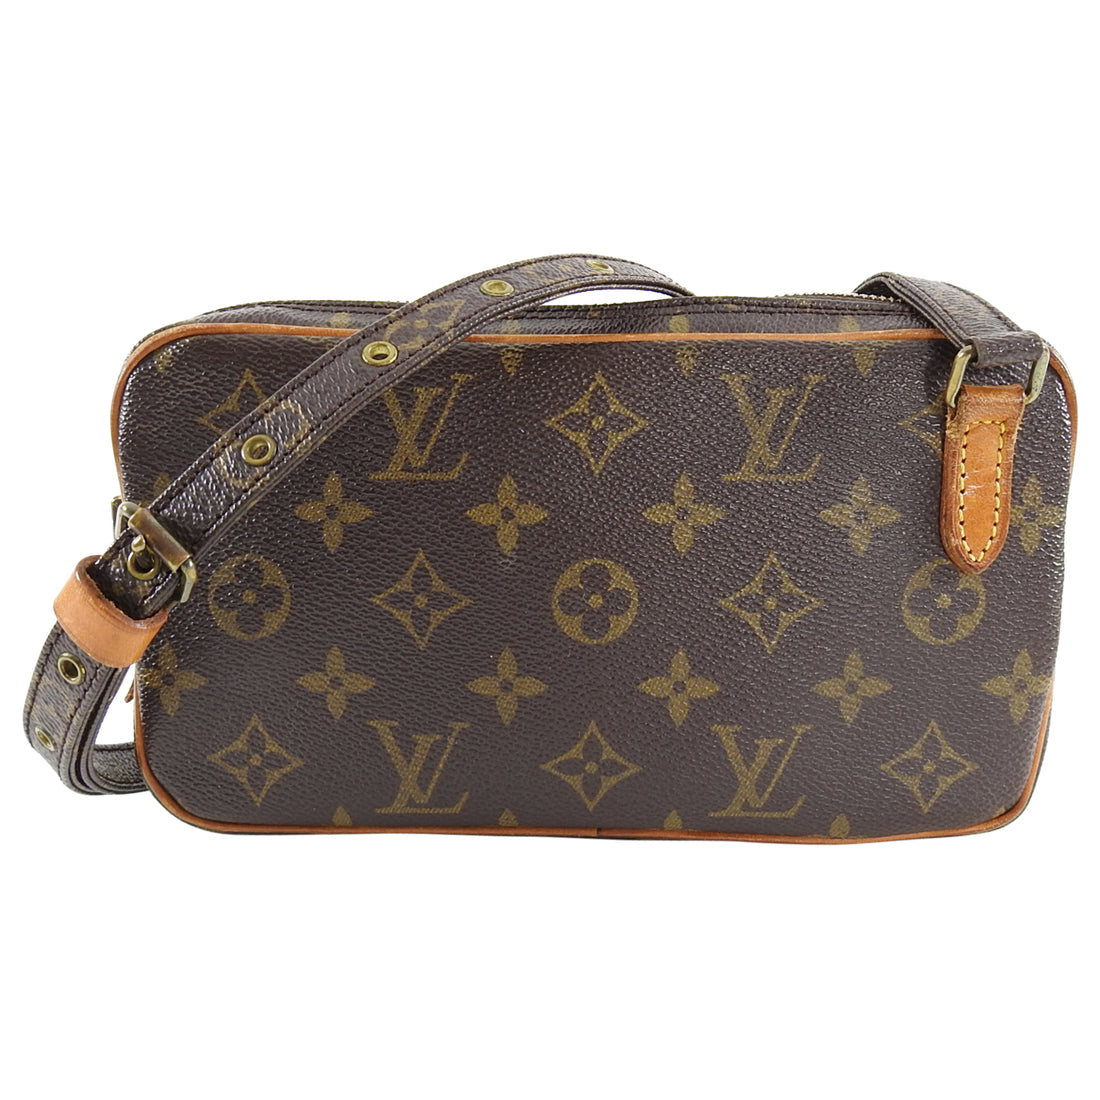 I miss you vintage - Louis Vuitton vintage 1988 Marly bandouliere crossbody  bag . . Available in store or purchase online with free ship in Canada for  orders $150+. Find additional photos